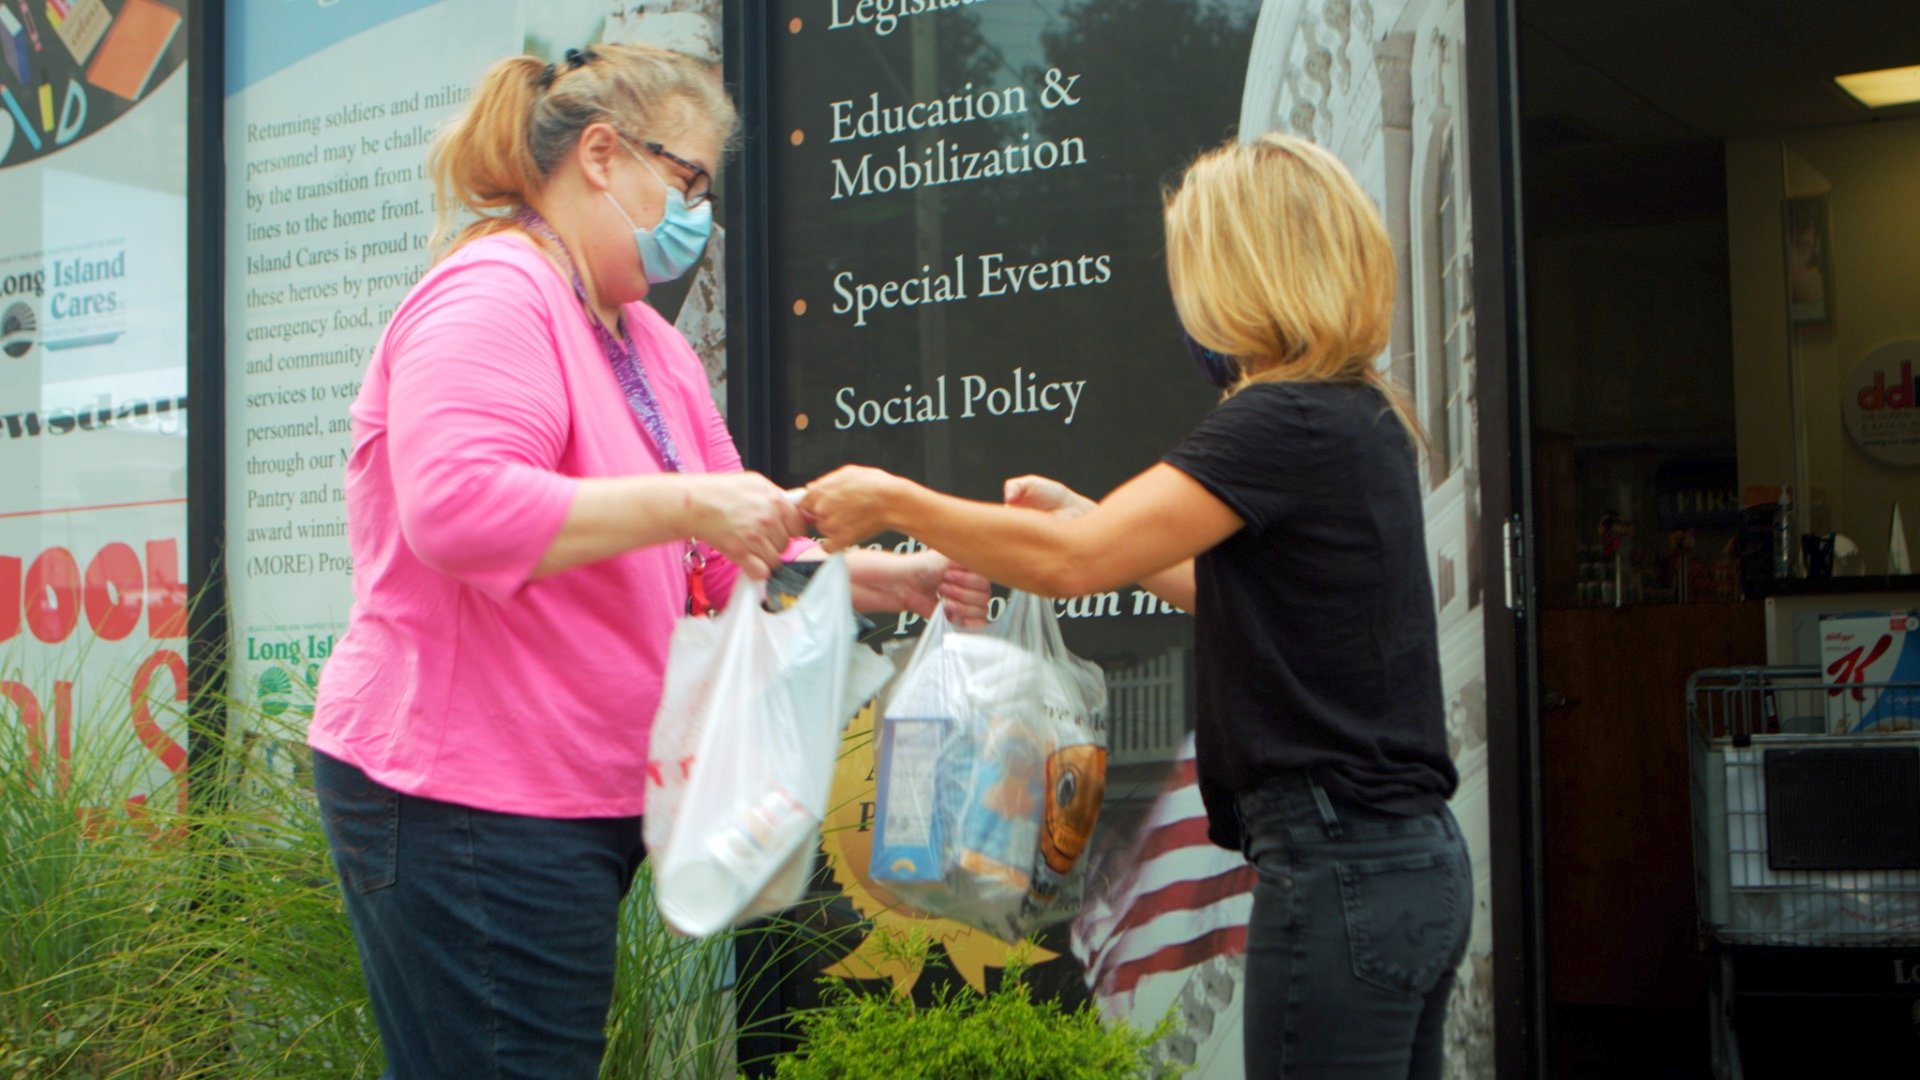 Middle age woman accepting a food donation from Long Island Cares volunteer